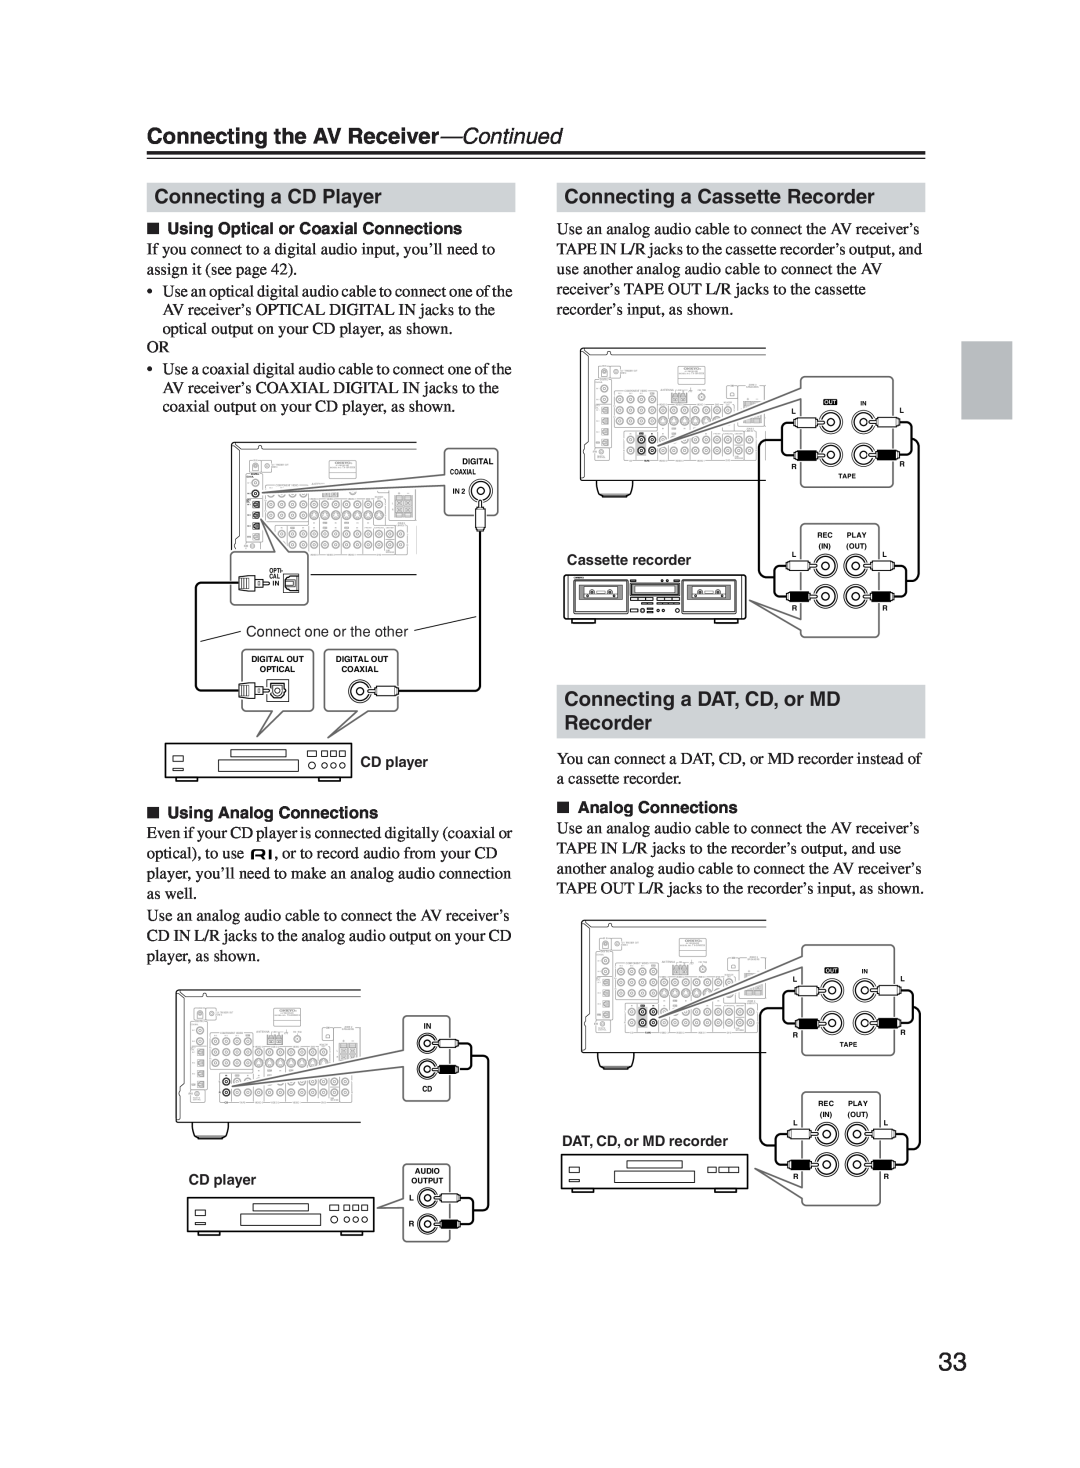 Onkyo TX-SR603X instruction manual Connecting a CD Player, Connecting a Cassette Recorder, Connecting a DAT, CD, or MD 